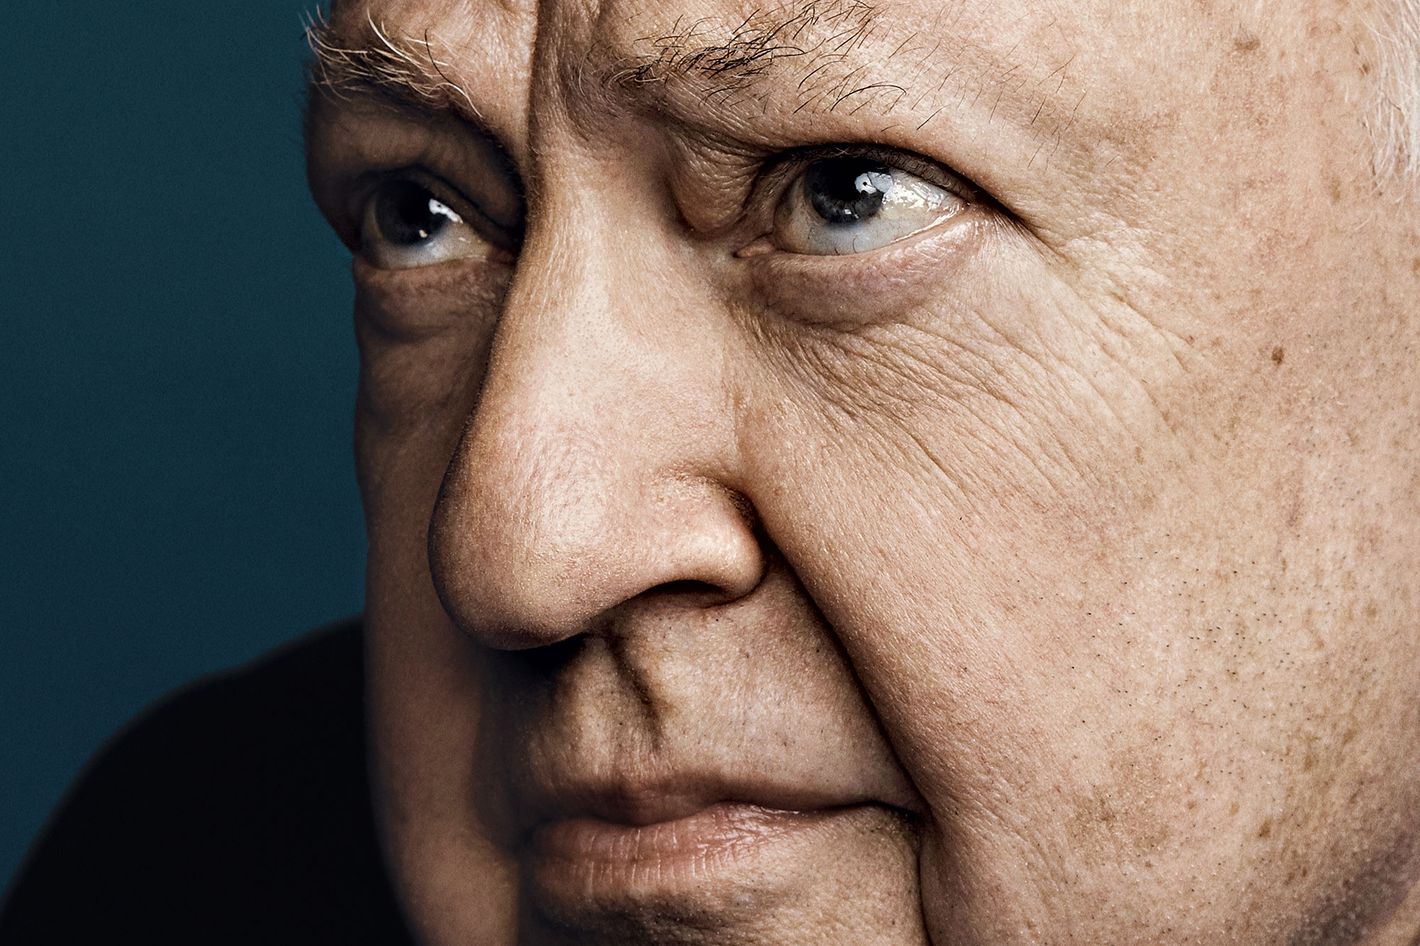 How Fox News Women Took Down Roger Ailes image